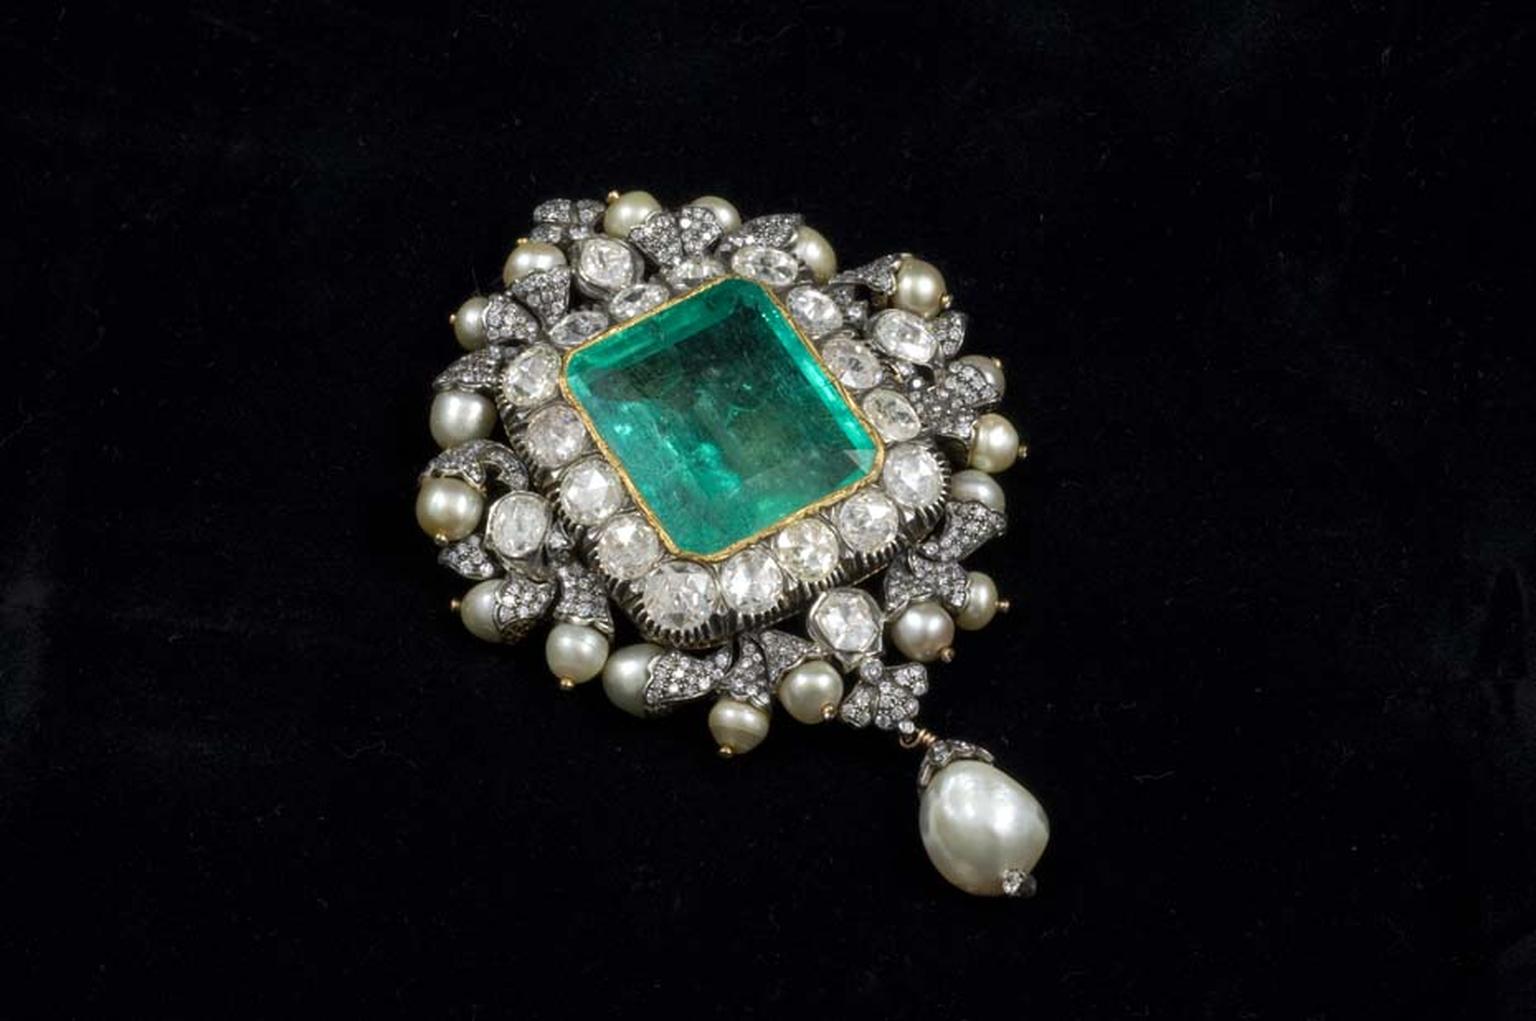 The Gem Palace brooch created using a central Gemfields emeralds, uncut diamonds and a pearl.